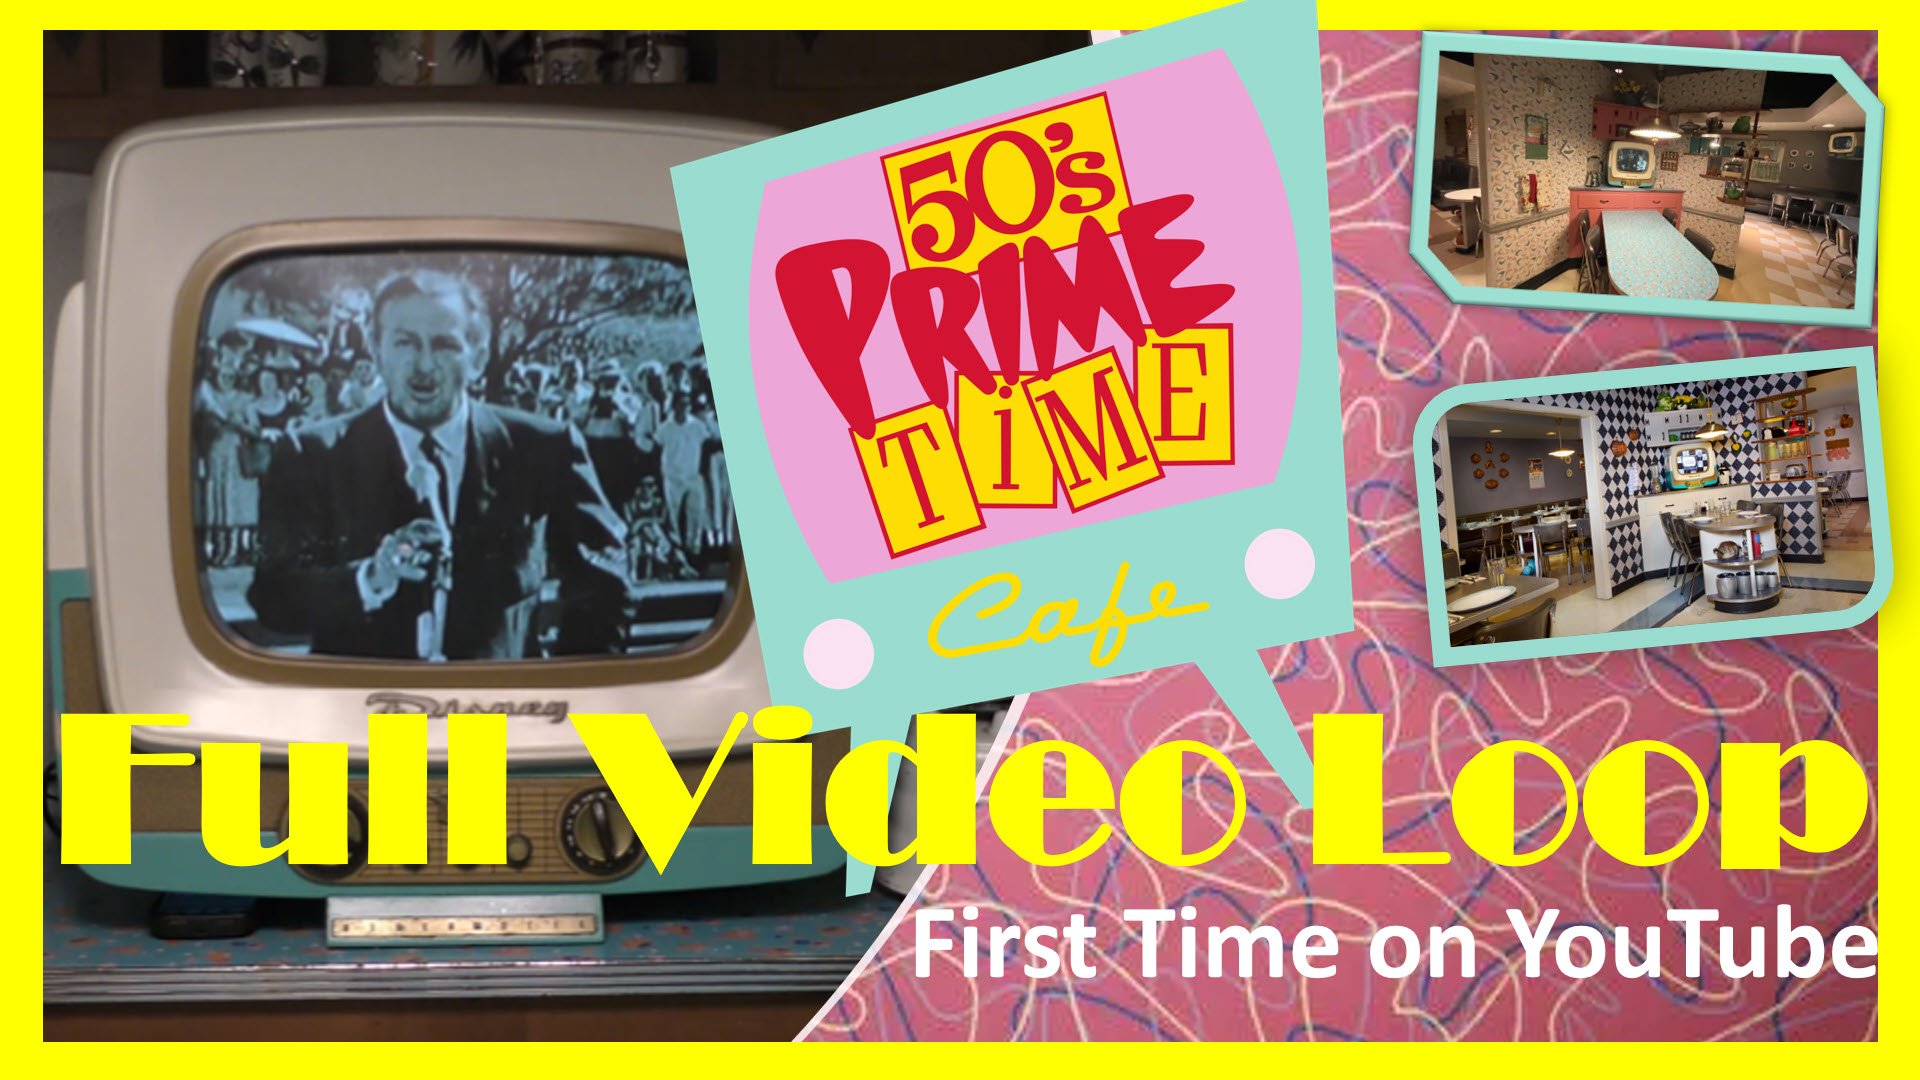 50's Prime Time Café | Full Video Loop | Hollywood Studios | First Time on YouTube